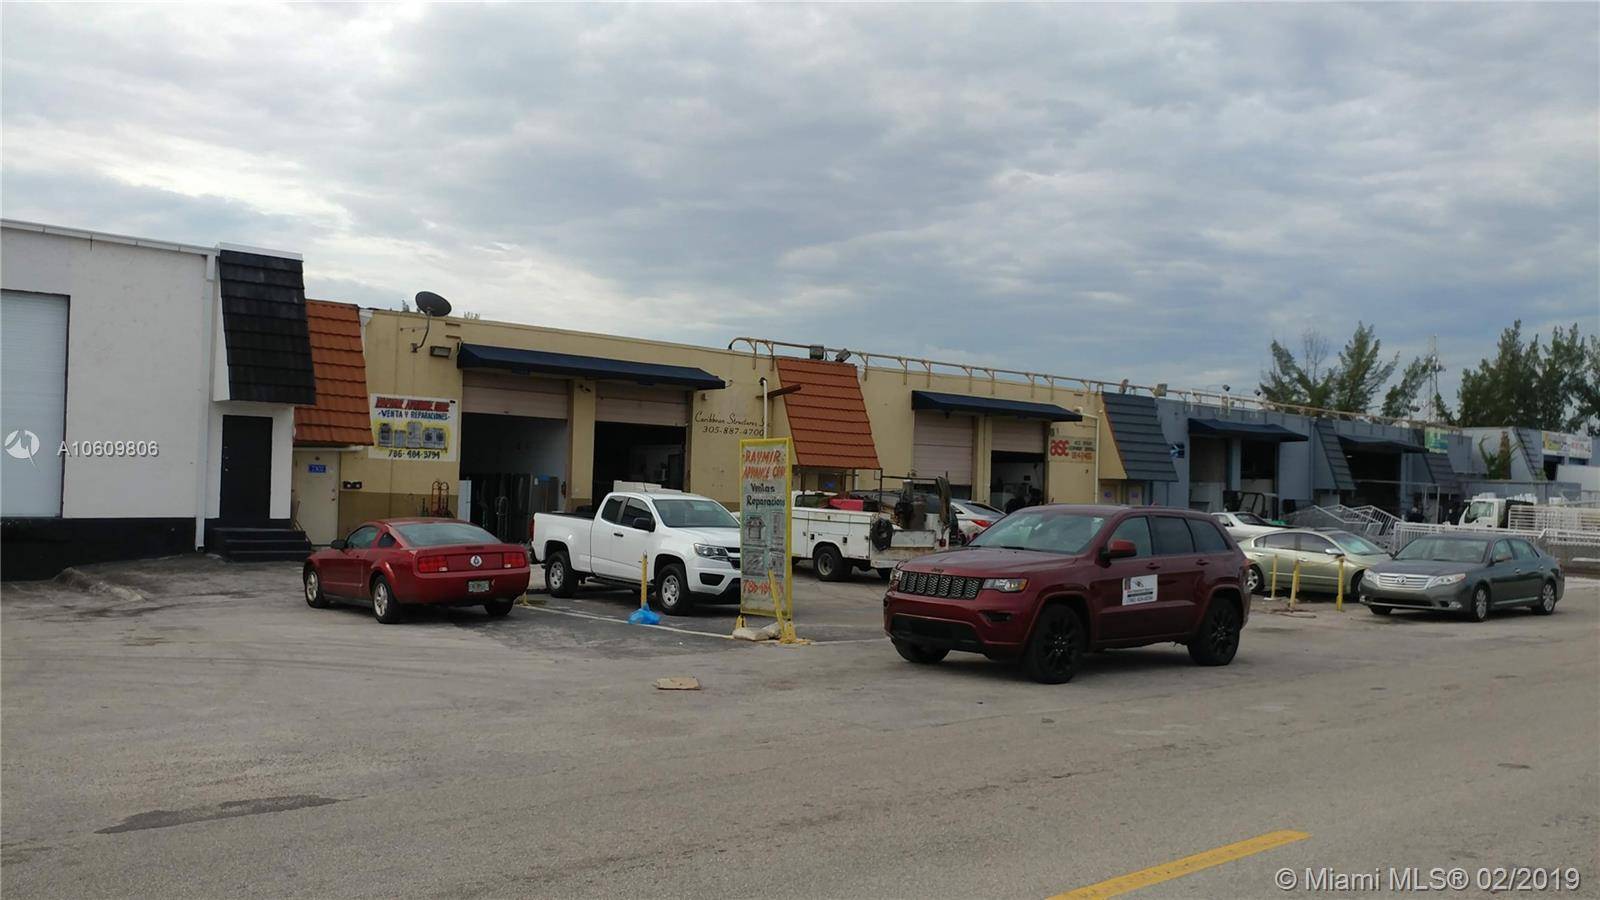 Great Location within the city of Medley Close Proximity to the Palmetto Expressway and Okeechobee Road, Owner wants to sell ASAP, Warehouse already rented, current tenant has been there for ...